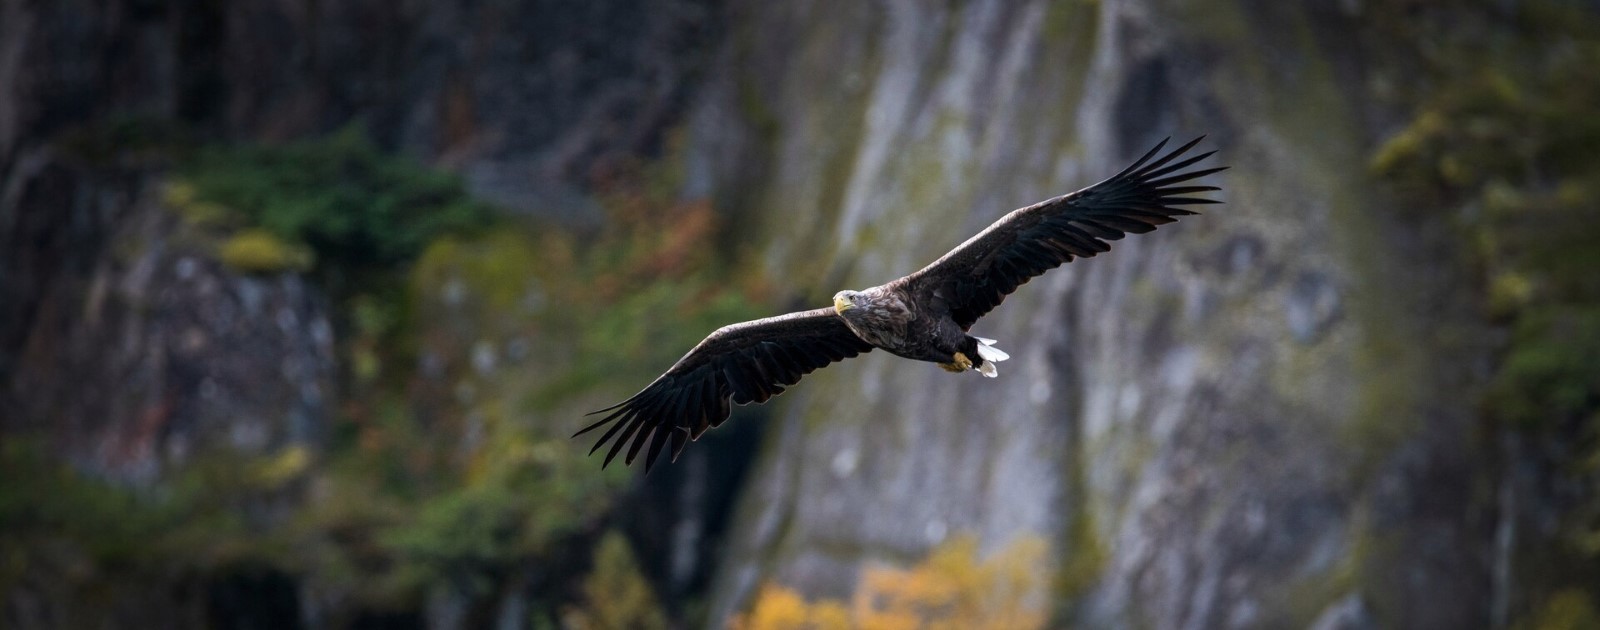 Britain's largest bird of prey the white-tailed eagle set to